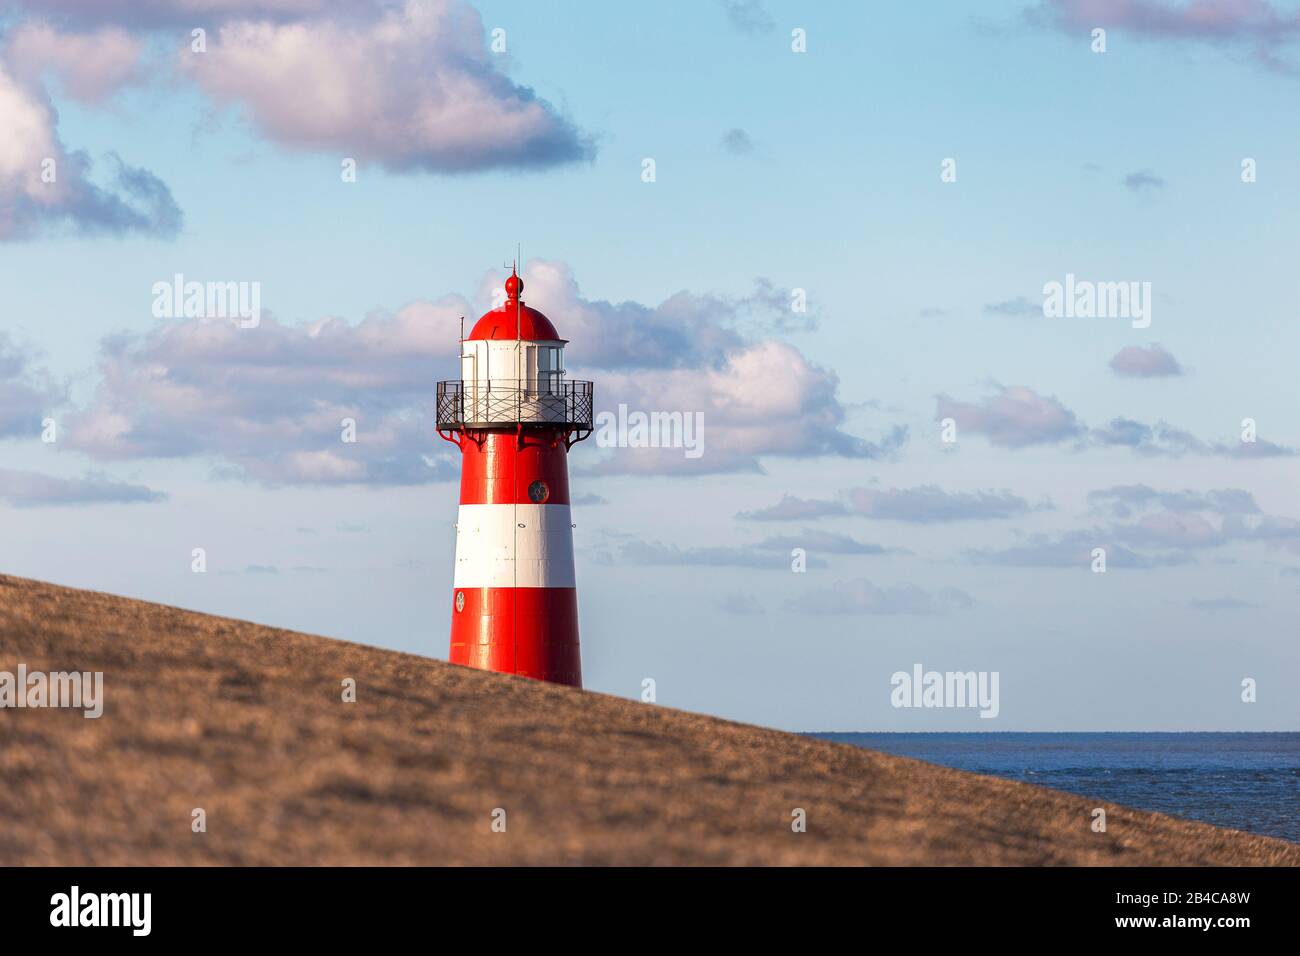 The lighthouse Noorderhooft, also known as Westkapelle Laag is one of the most known Lighthouses in the Netherlands, It was built in 1875. Stock Photo